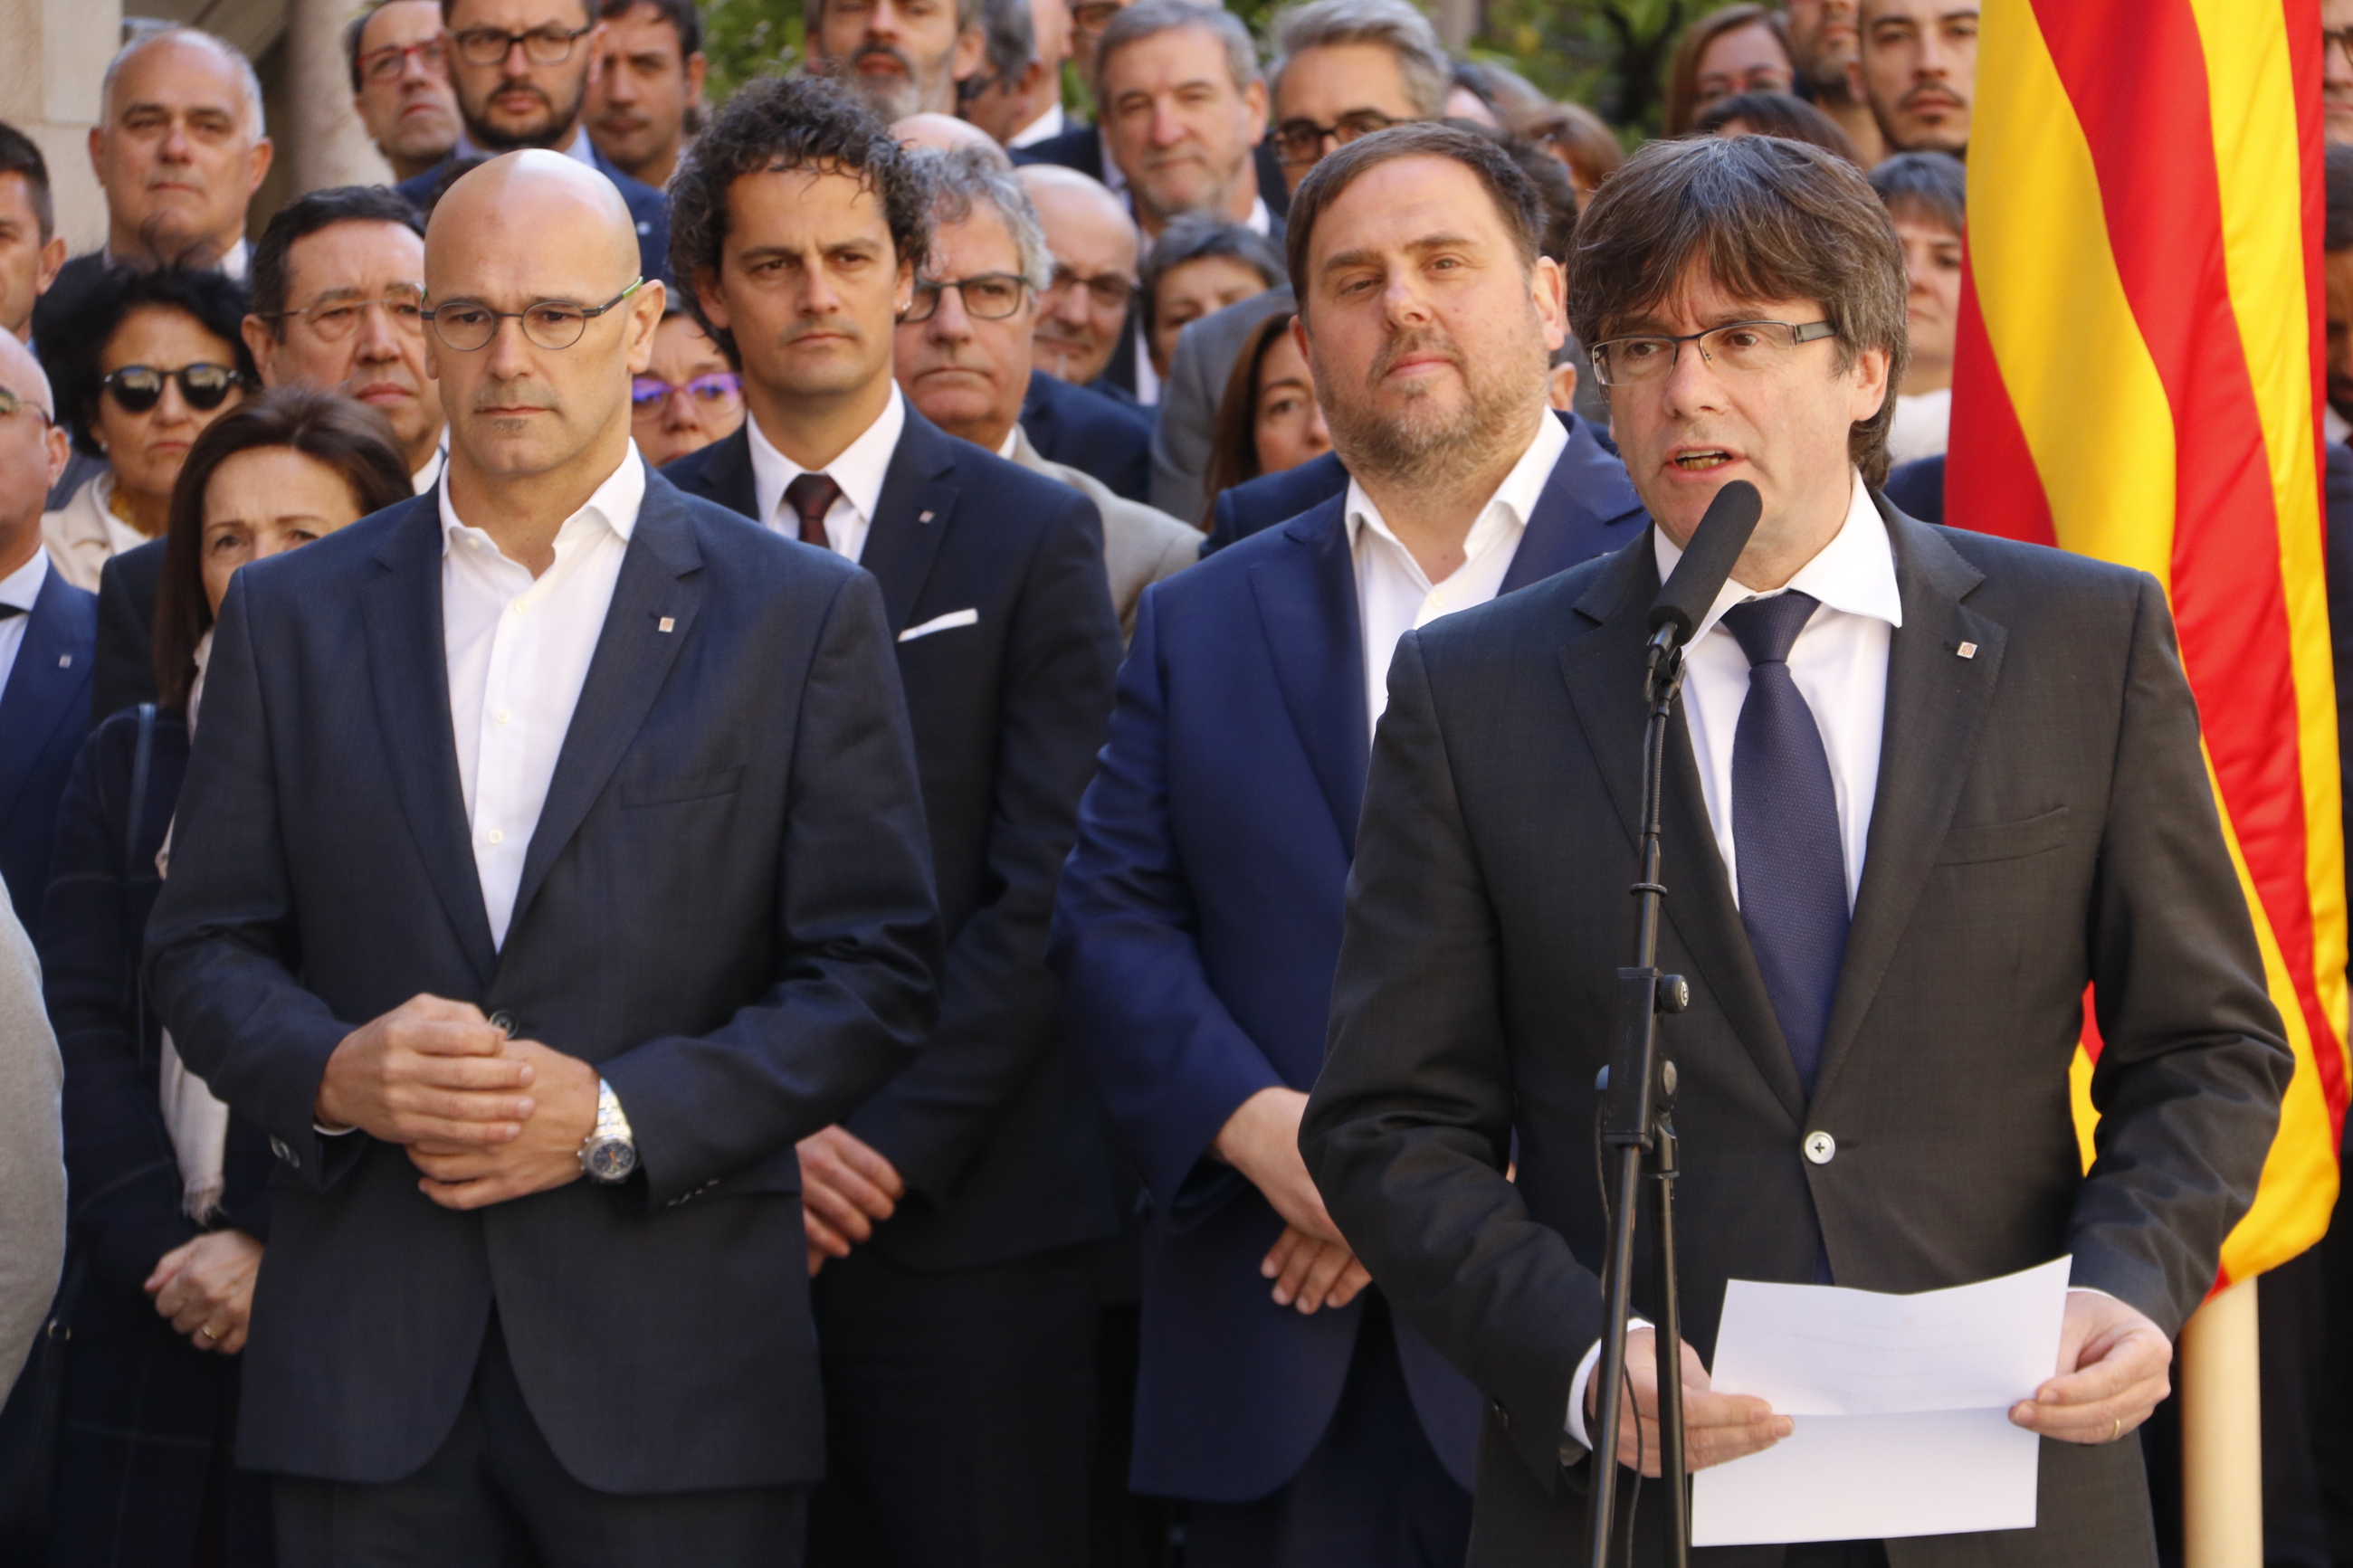 Catalan President, Carles Puigdemont, joined by Catalan VP, Oriol Junqueras, Catalan Minsiter for Foreign Affairs, Raül Romeva and representatives of the National Pact for the Referendum (by ACN)